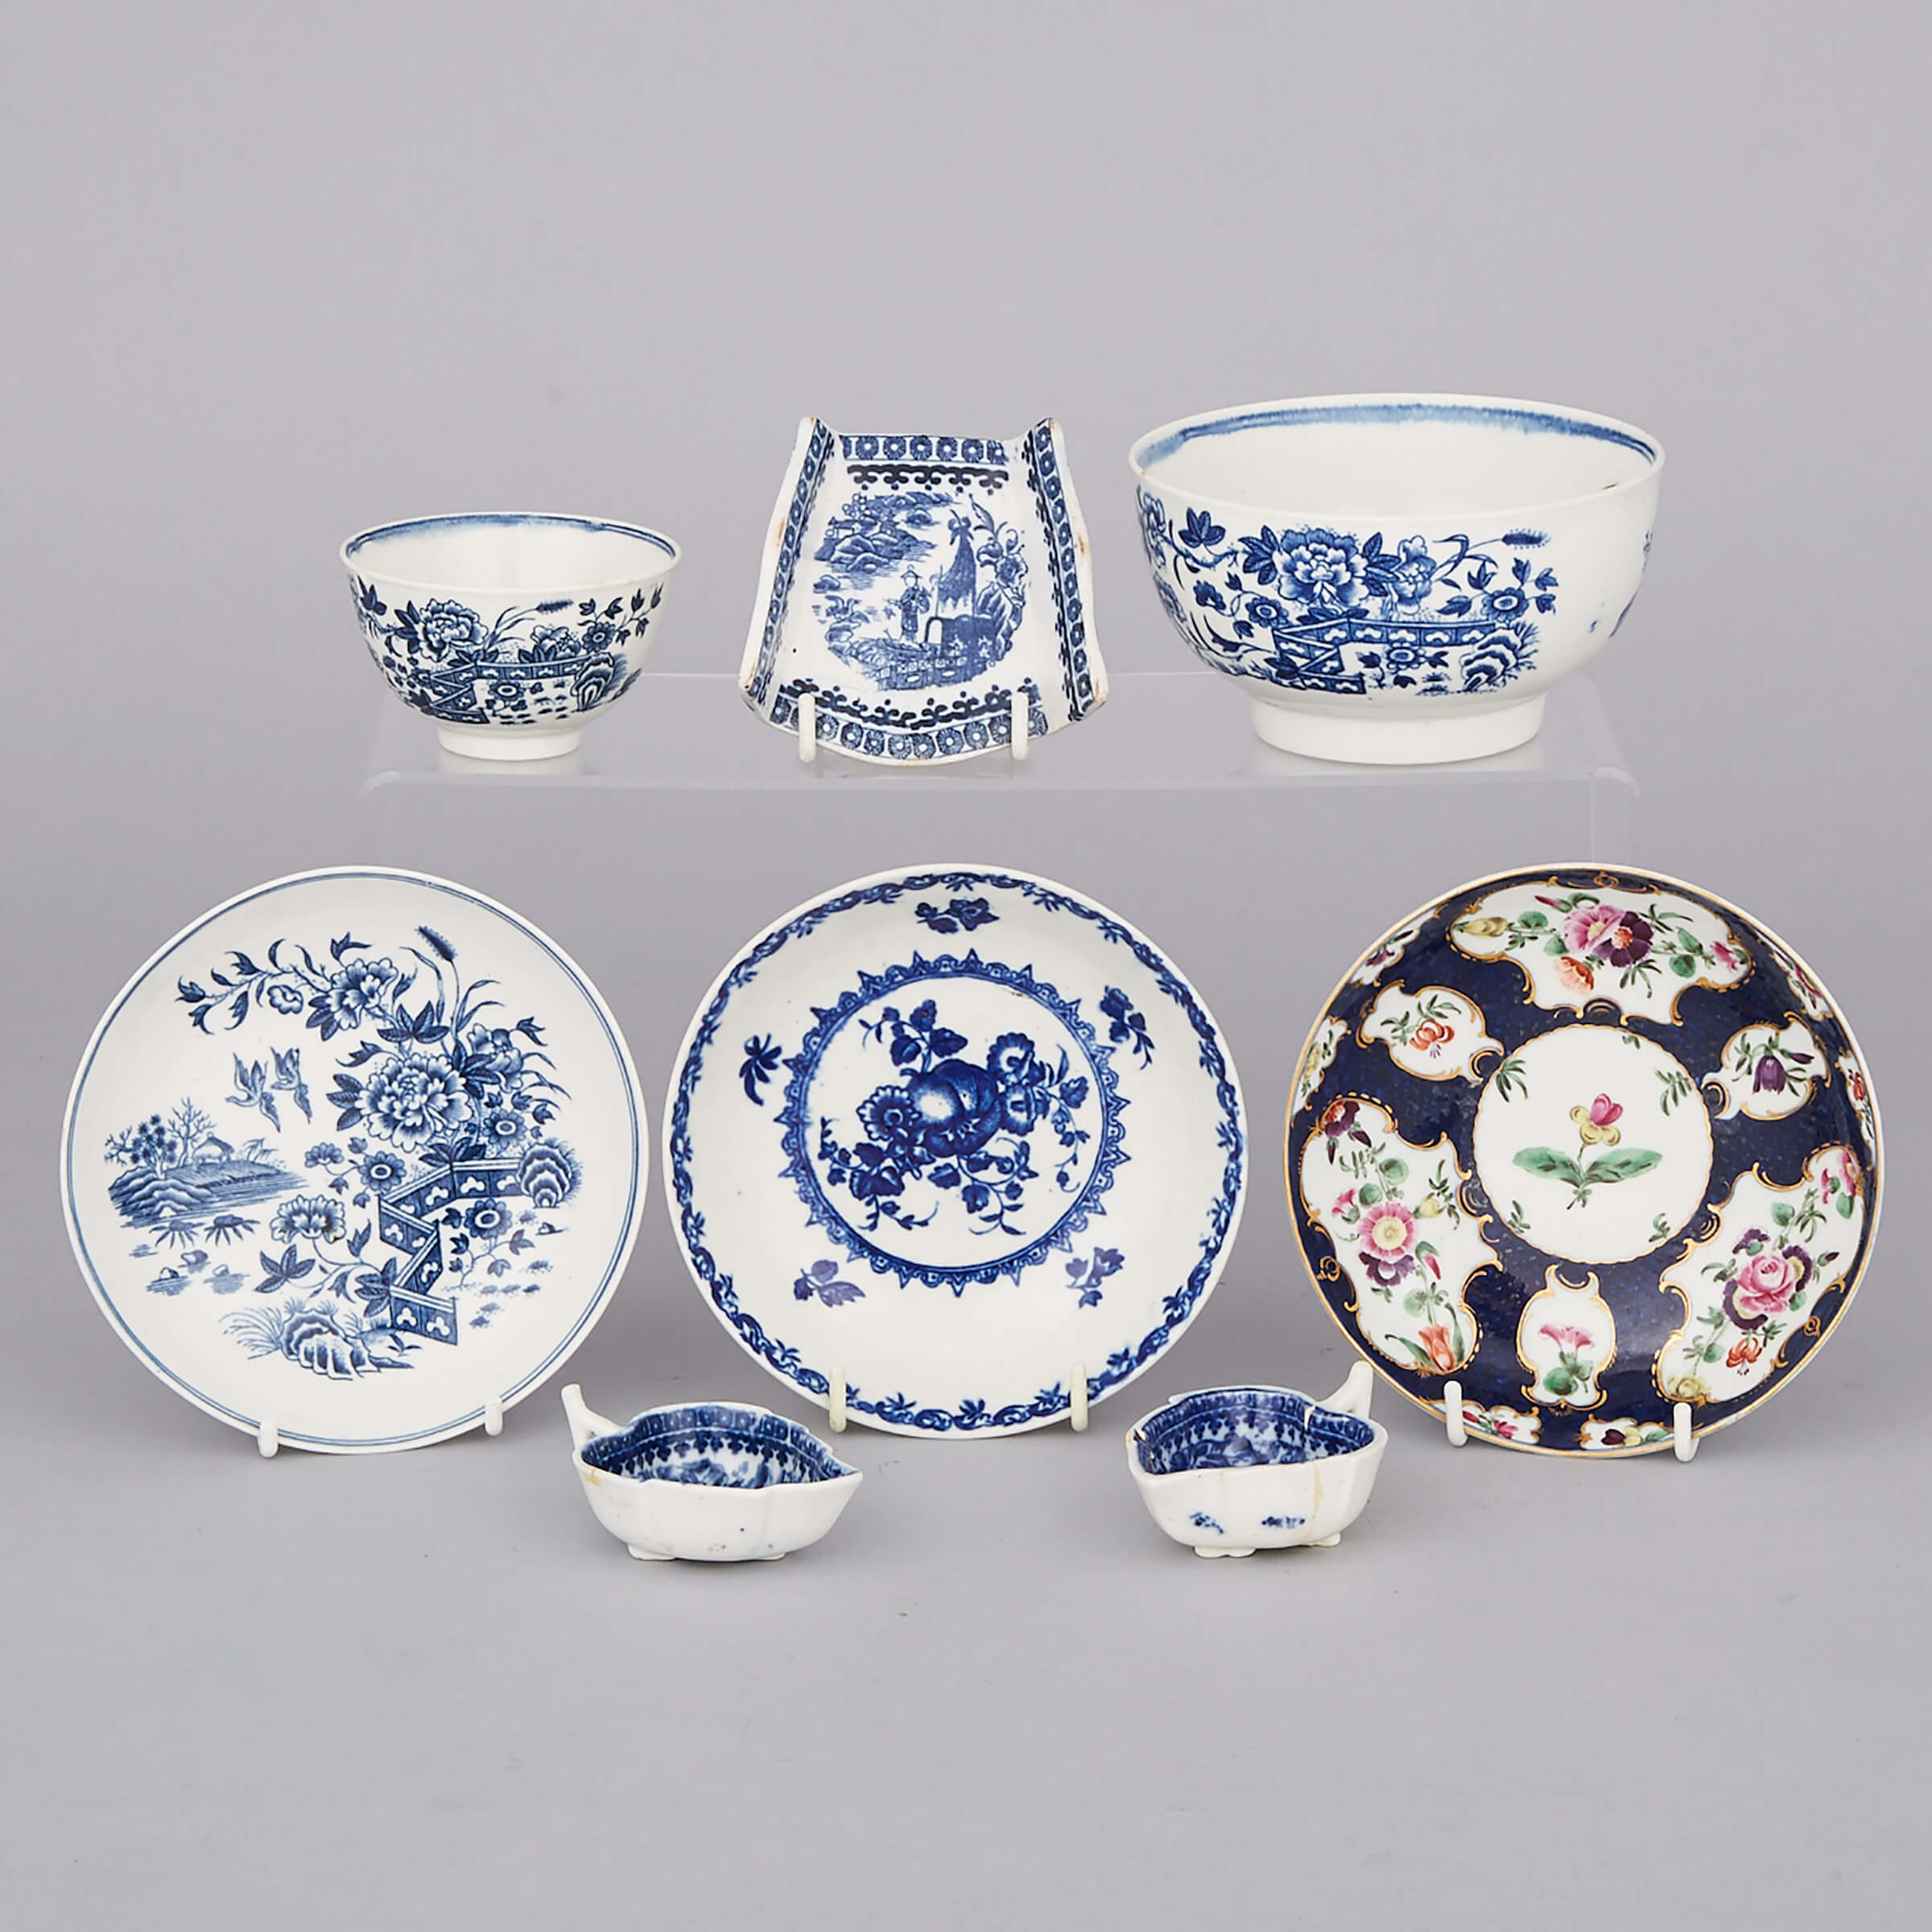 Group of Worcester Blue and White Porcelain and a Scale Blue Ground Saucer, 18th century